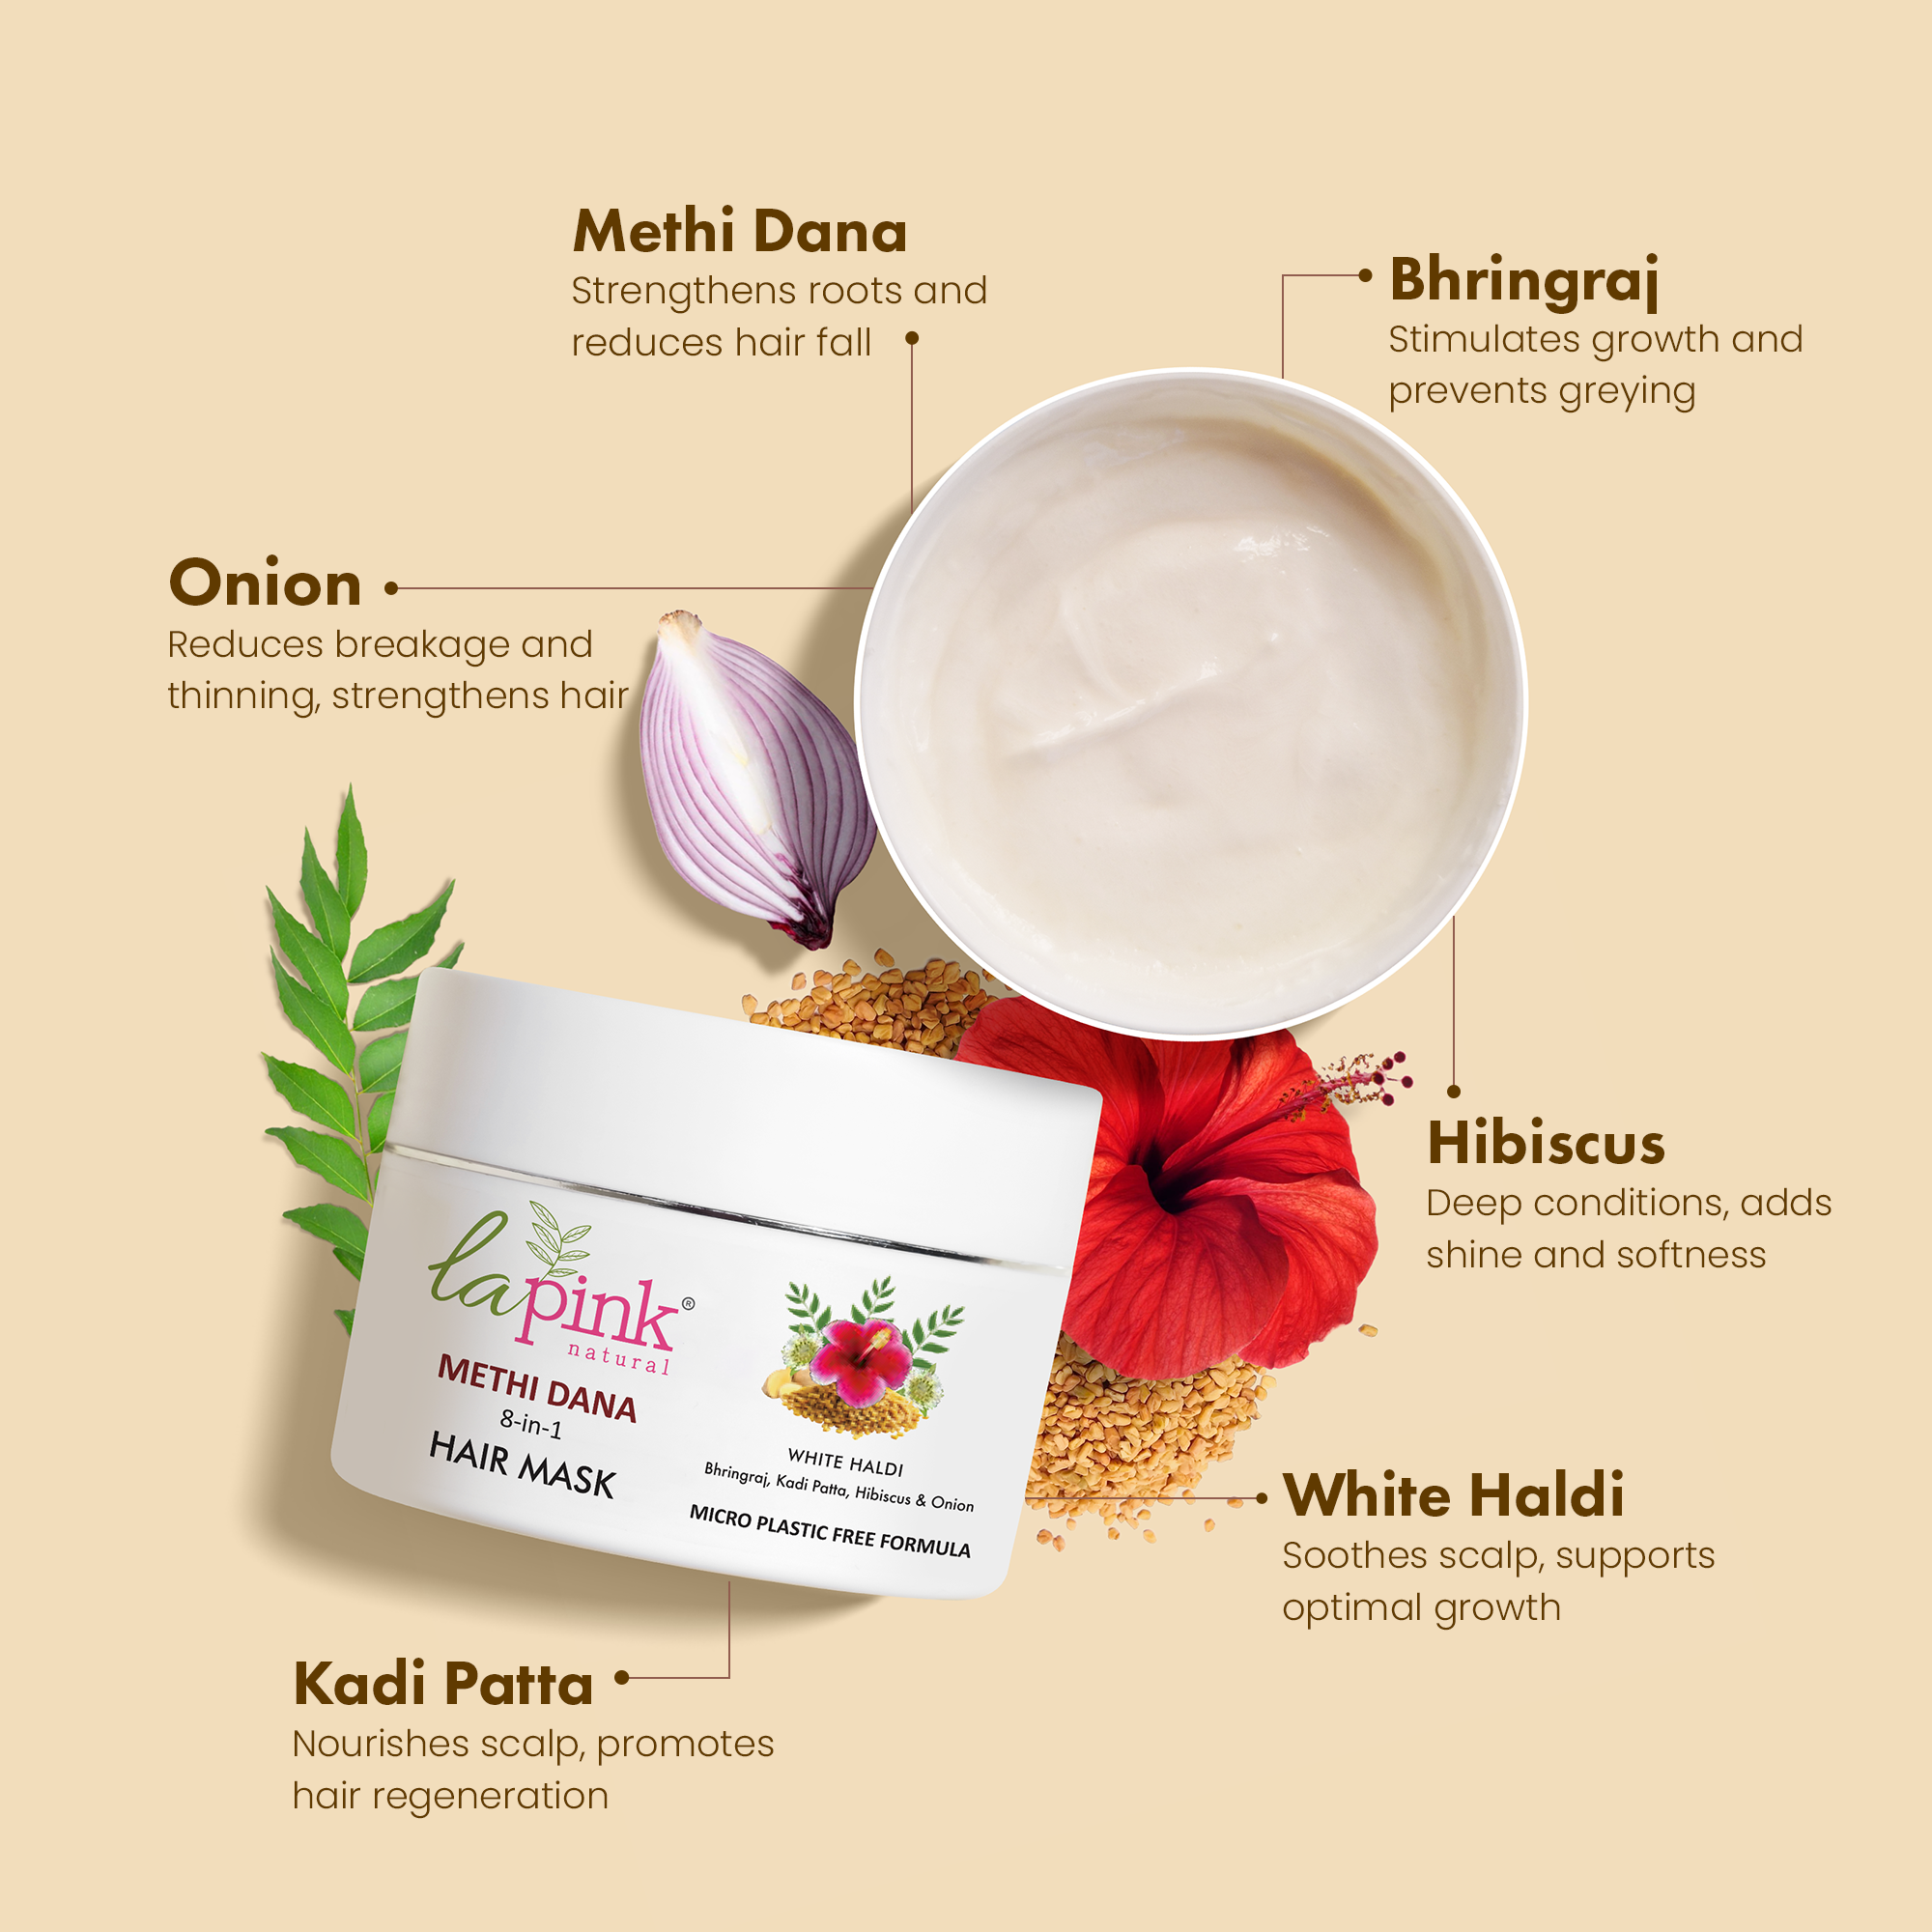 Methi Dana 8-in-1 Hair Mask with White Haldi for Hair Fall Control &amp; promoting Hair Growth